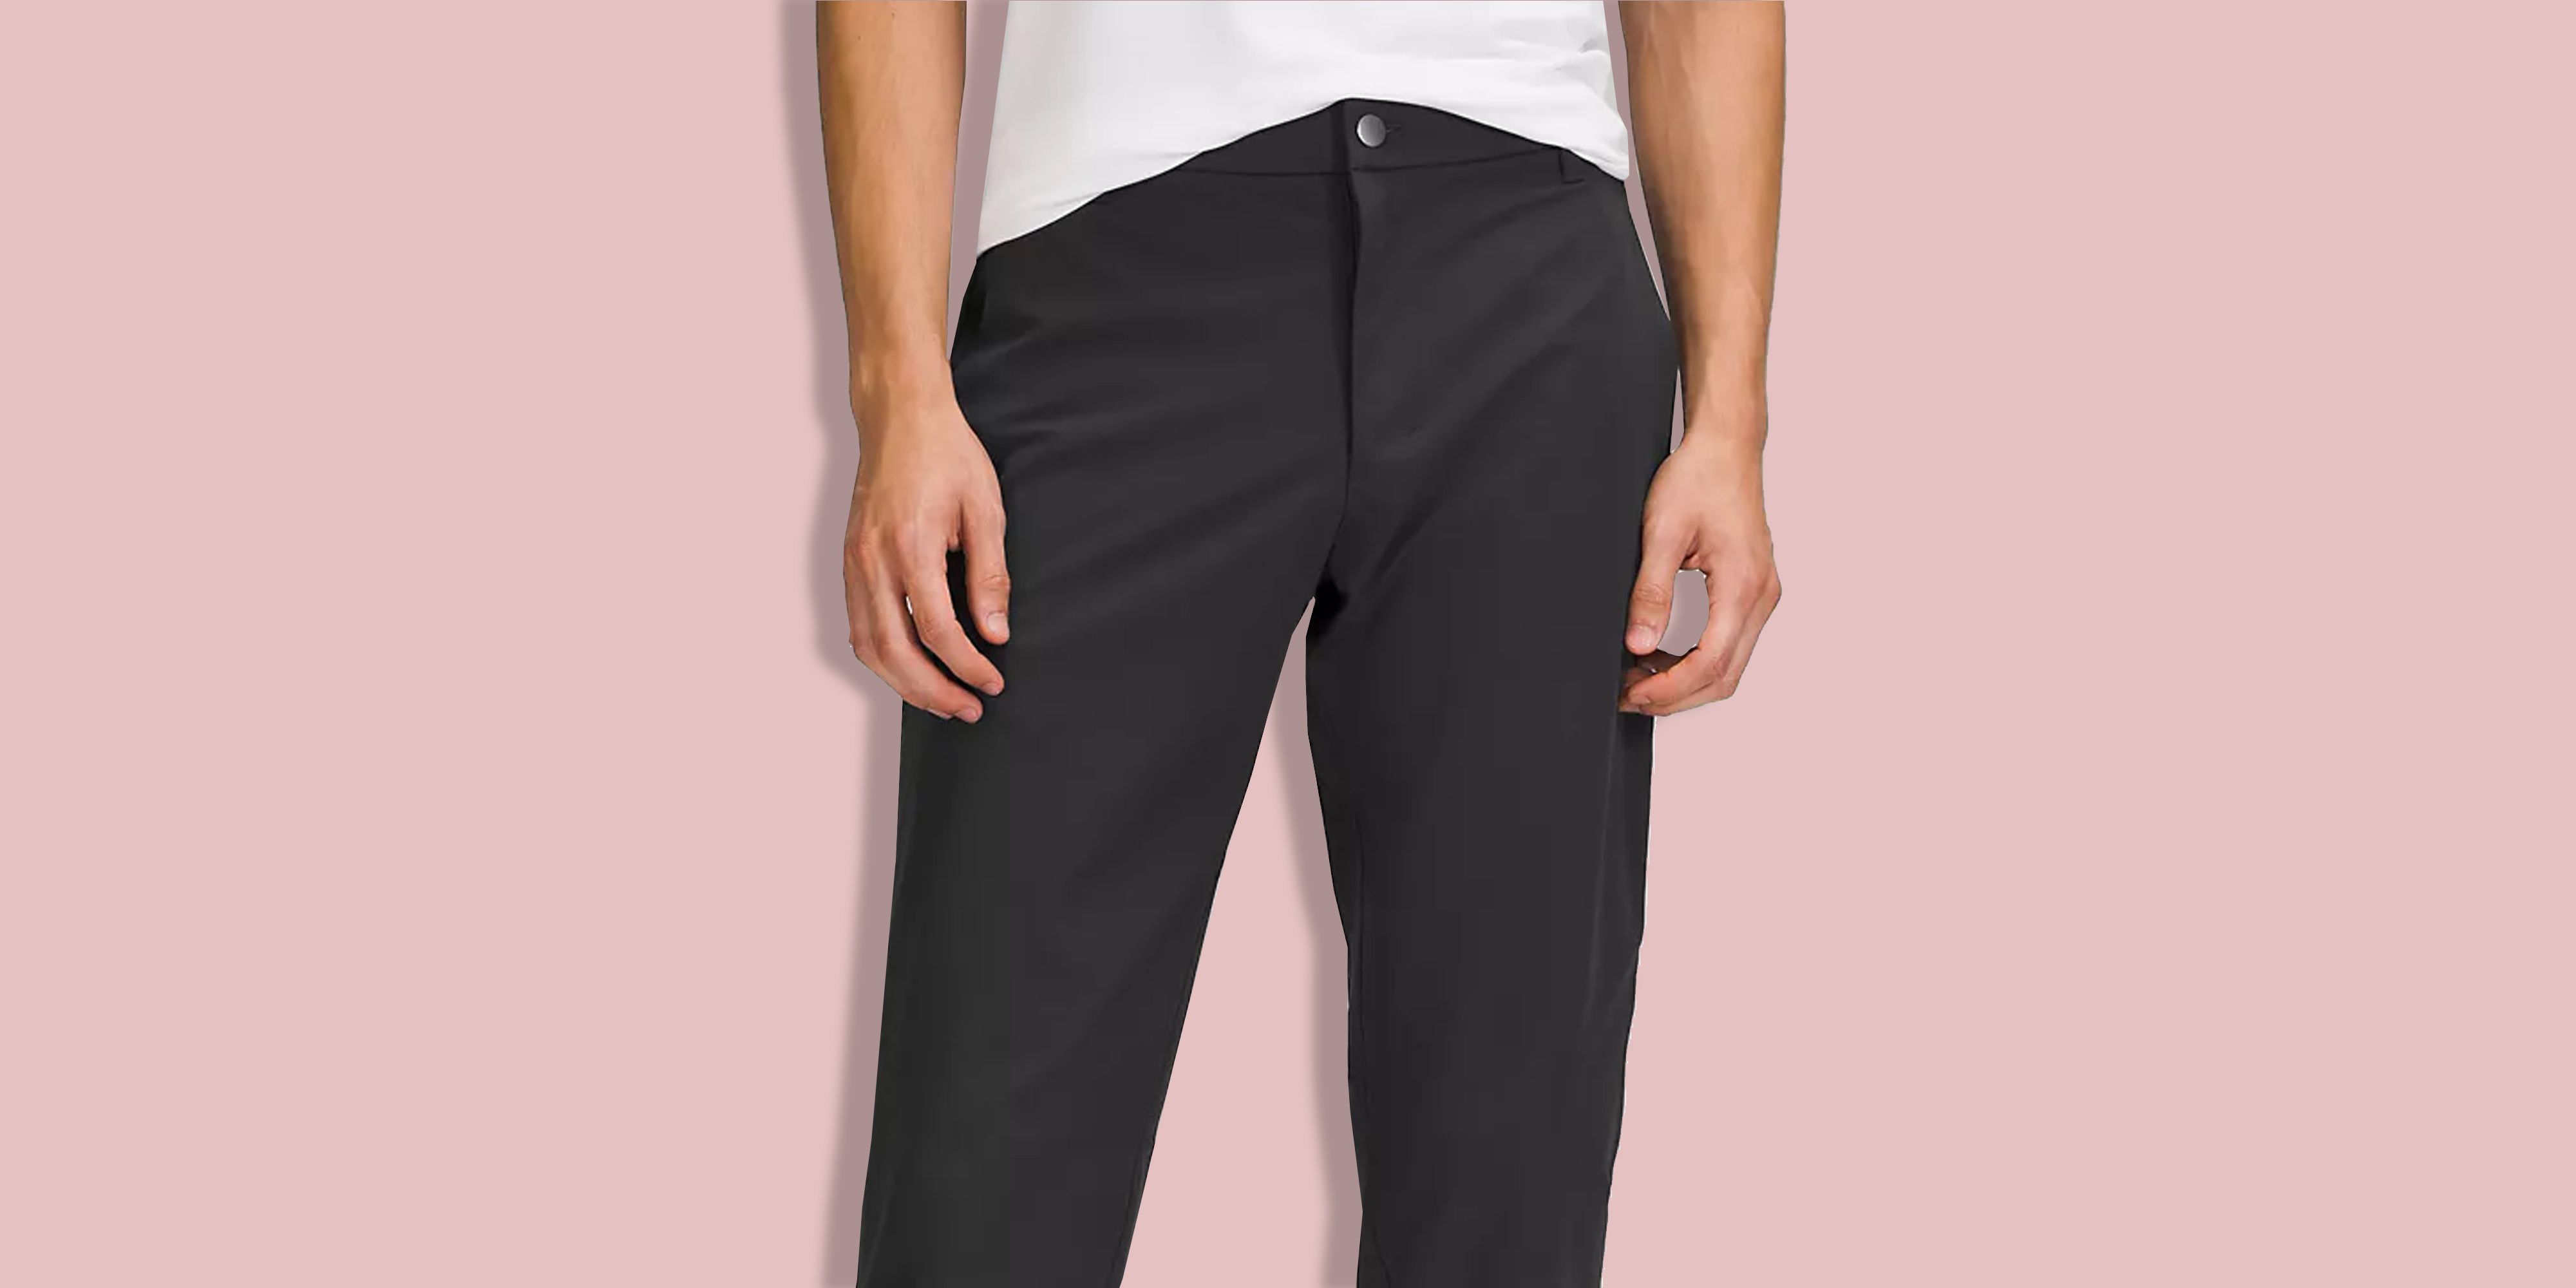 23 Best Work Pants 2023 - Bottoms to Wear to the Office